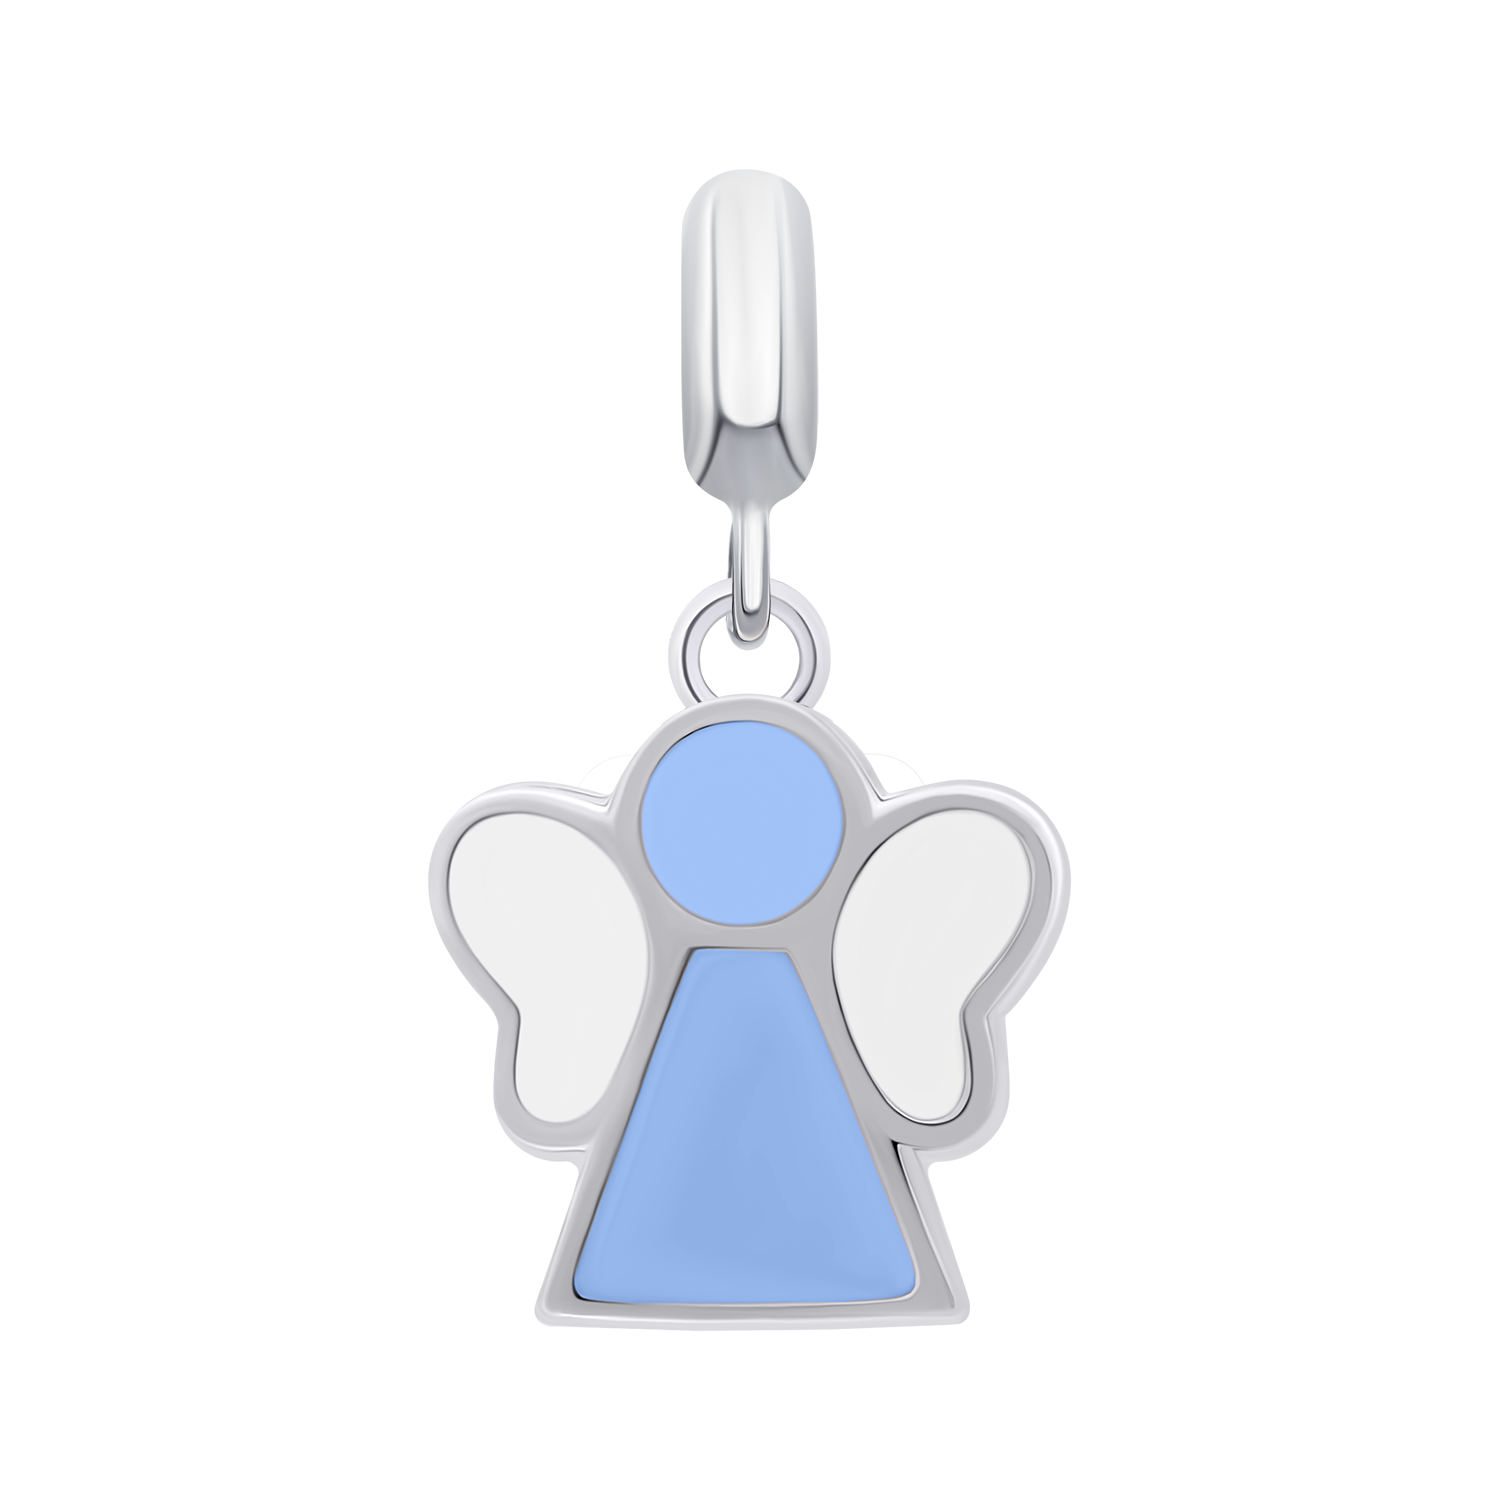 Pendant Angel with blue and white enamel